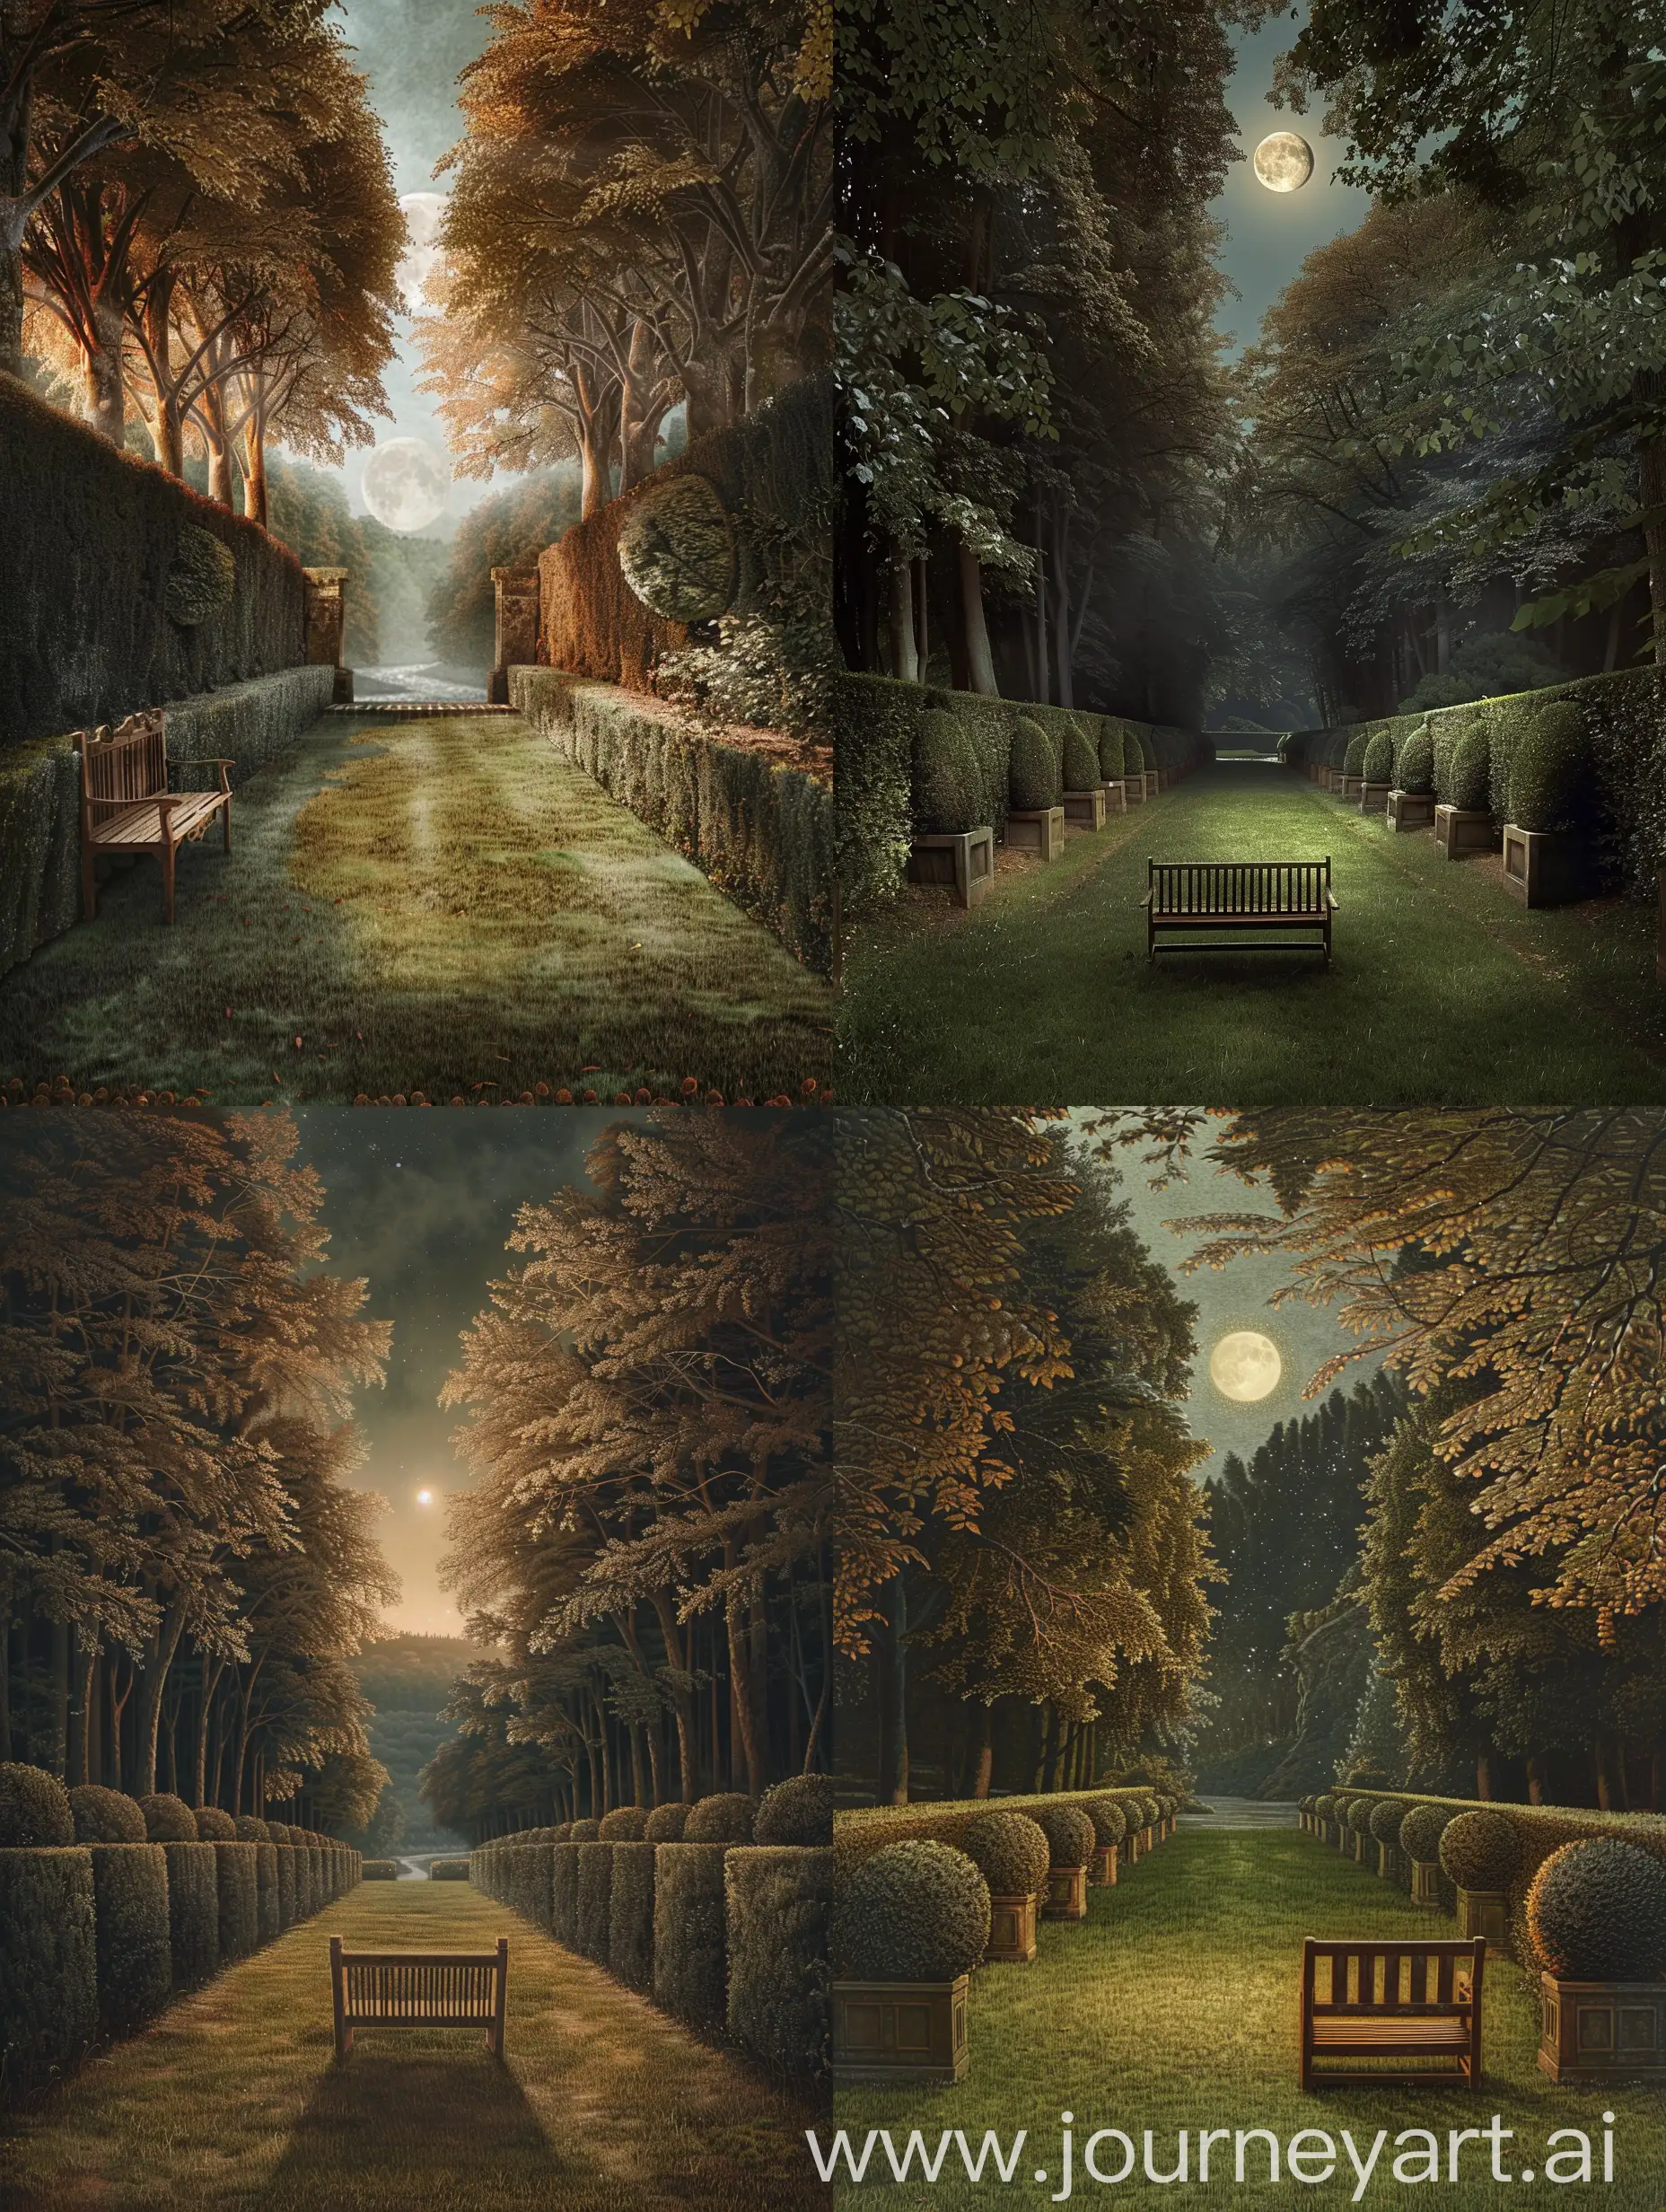 Moonlit-Avenue-with-Chestnut-Trees-and-Wooden-Bench